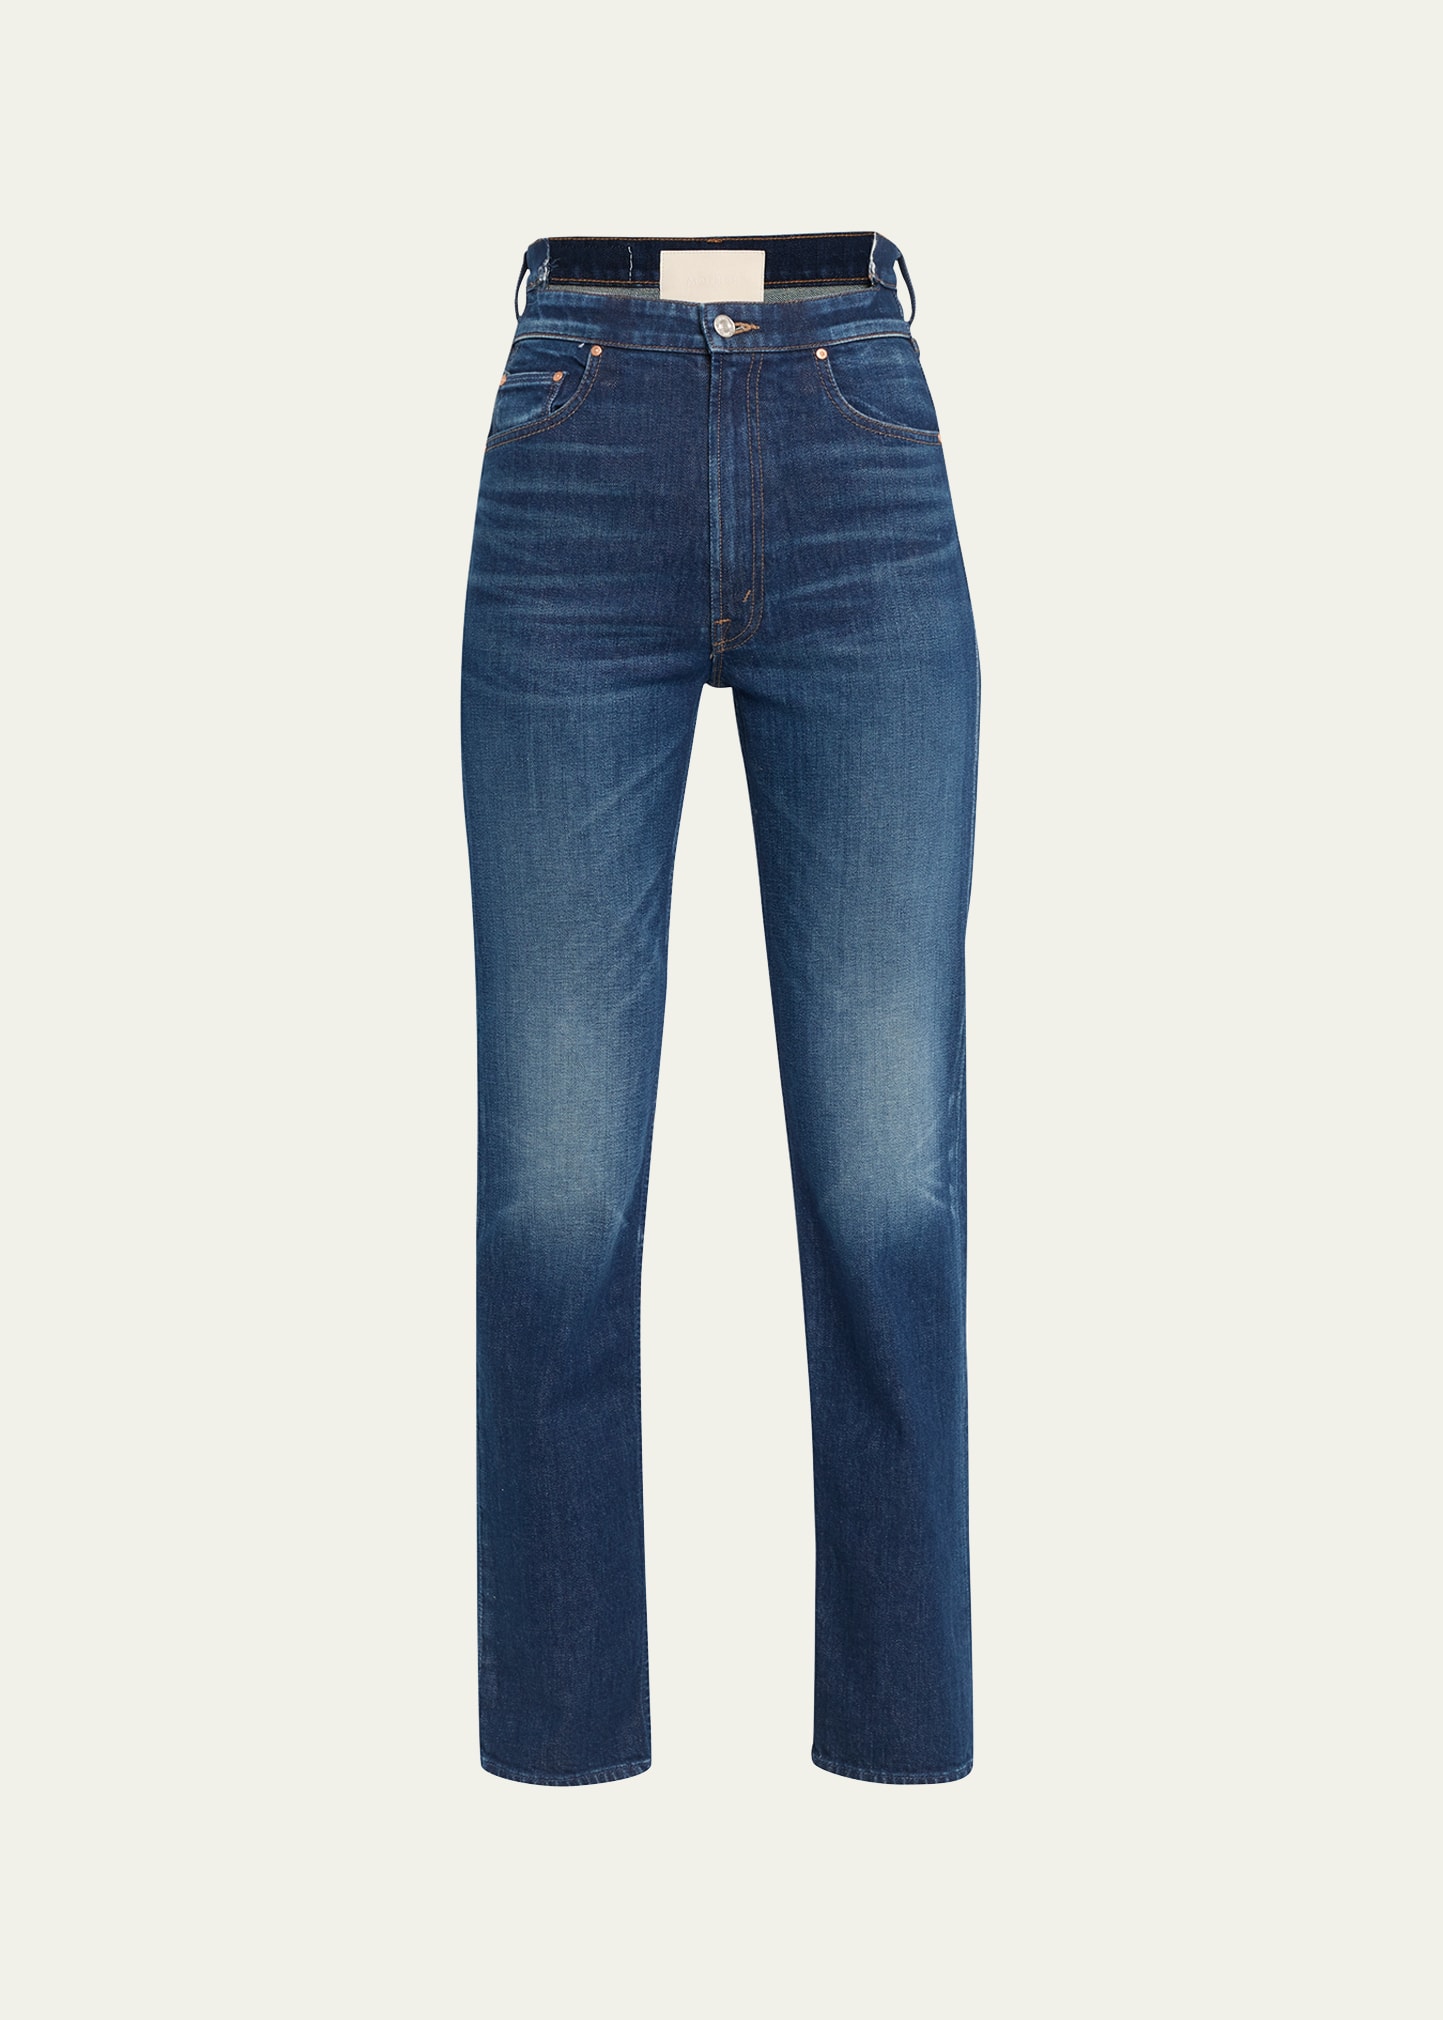 MOTHER THE HIGH WAISTED RIDER SHIFT SNEAK JEANS